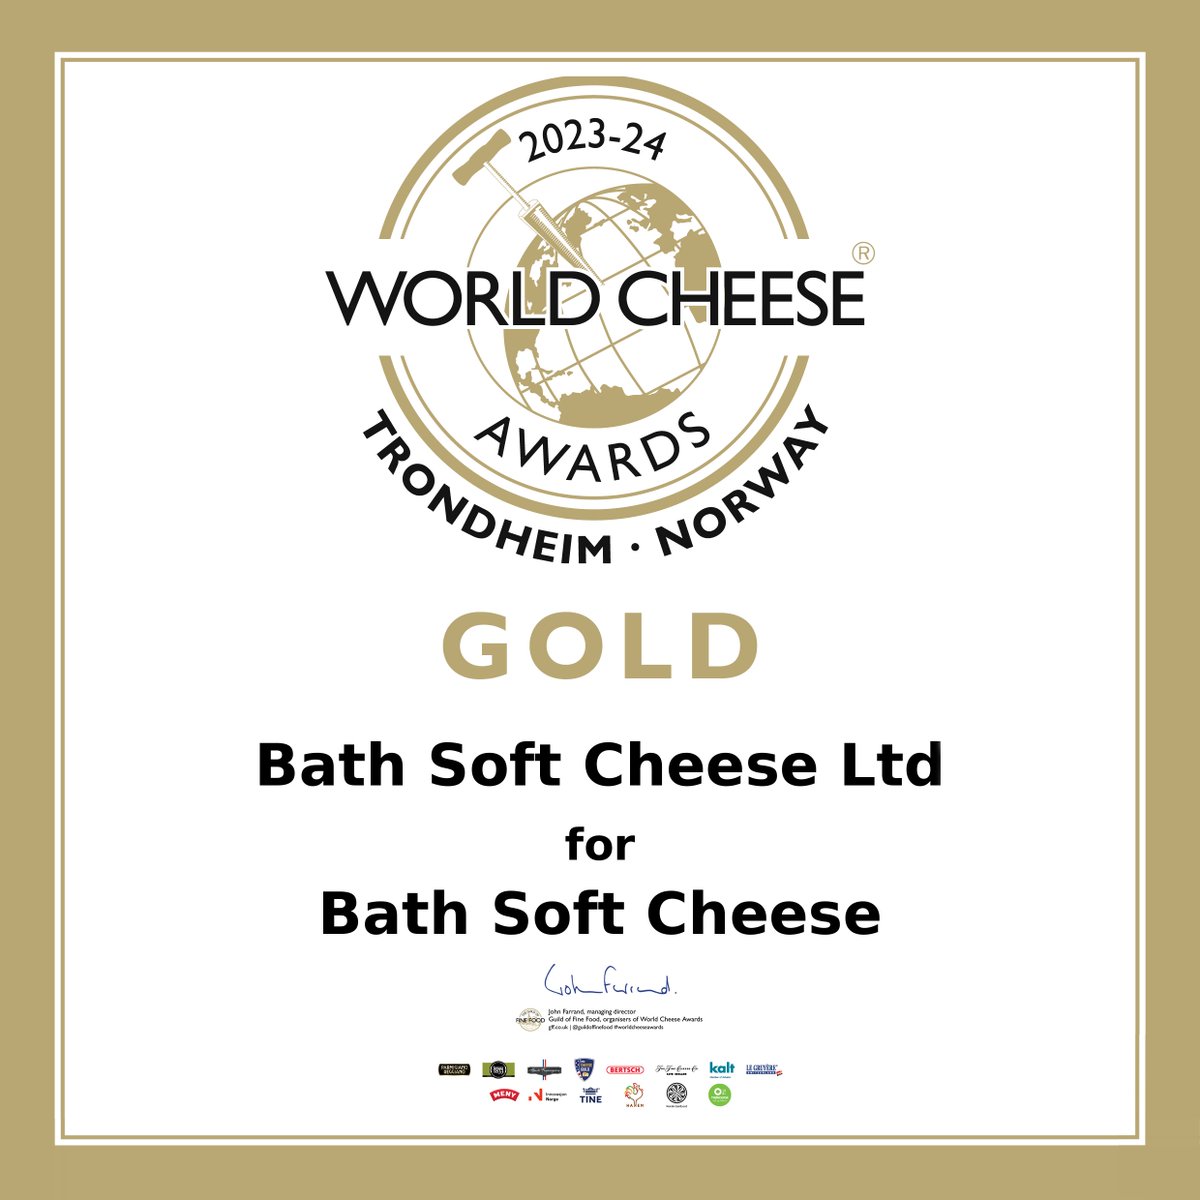 The results for the World Cheese Awards are in and we are pleased to be adding more incredible awards to our collection!

This year the judging took place in Trondheim, Norway! 🧀

#worldcheeseawards #awardwinning #awards #winner #cheese #britishcheese #norway #cheesy